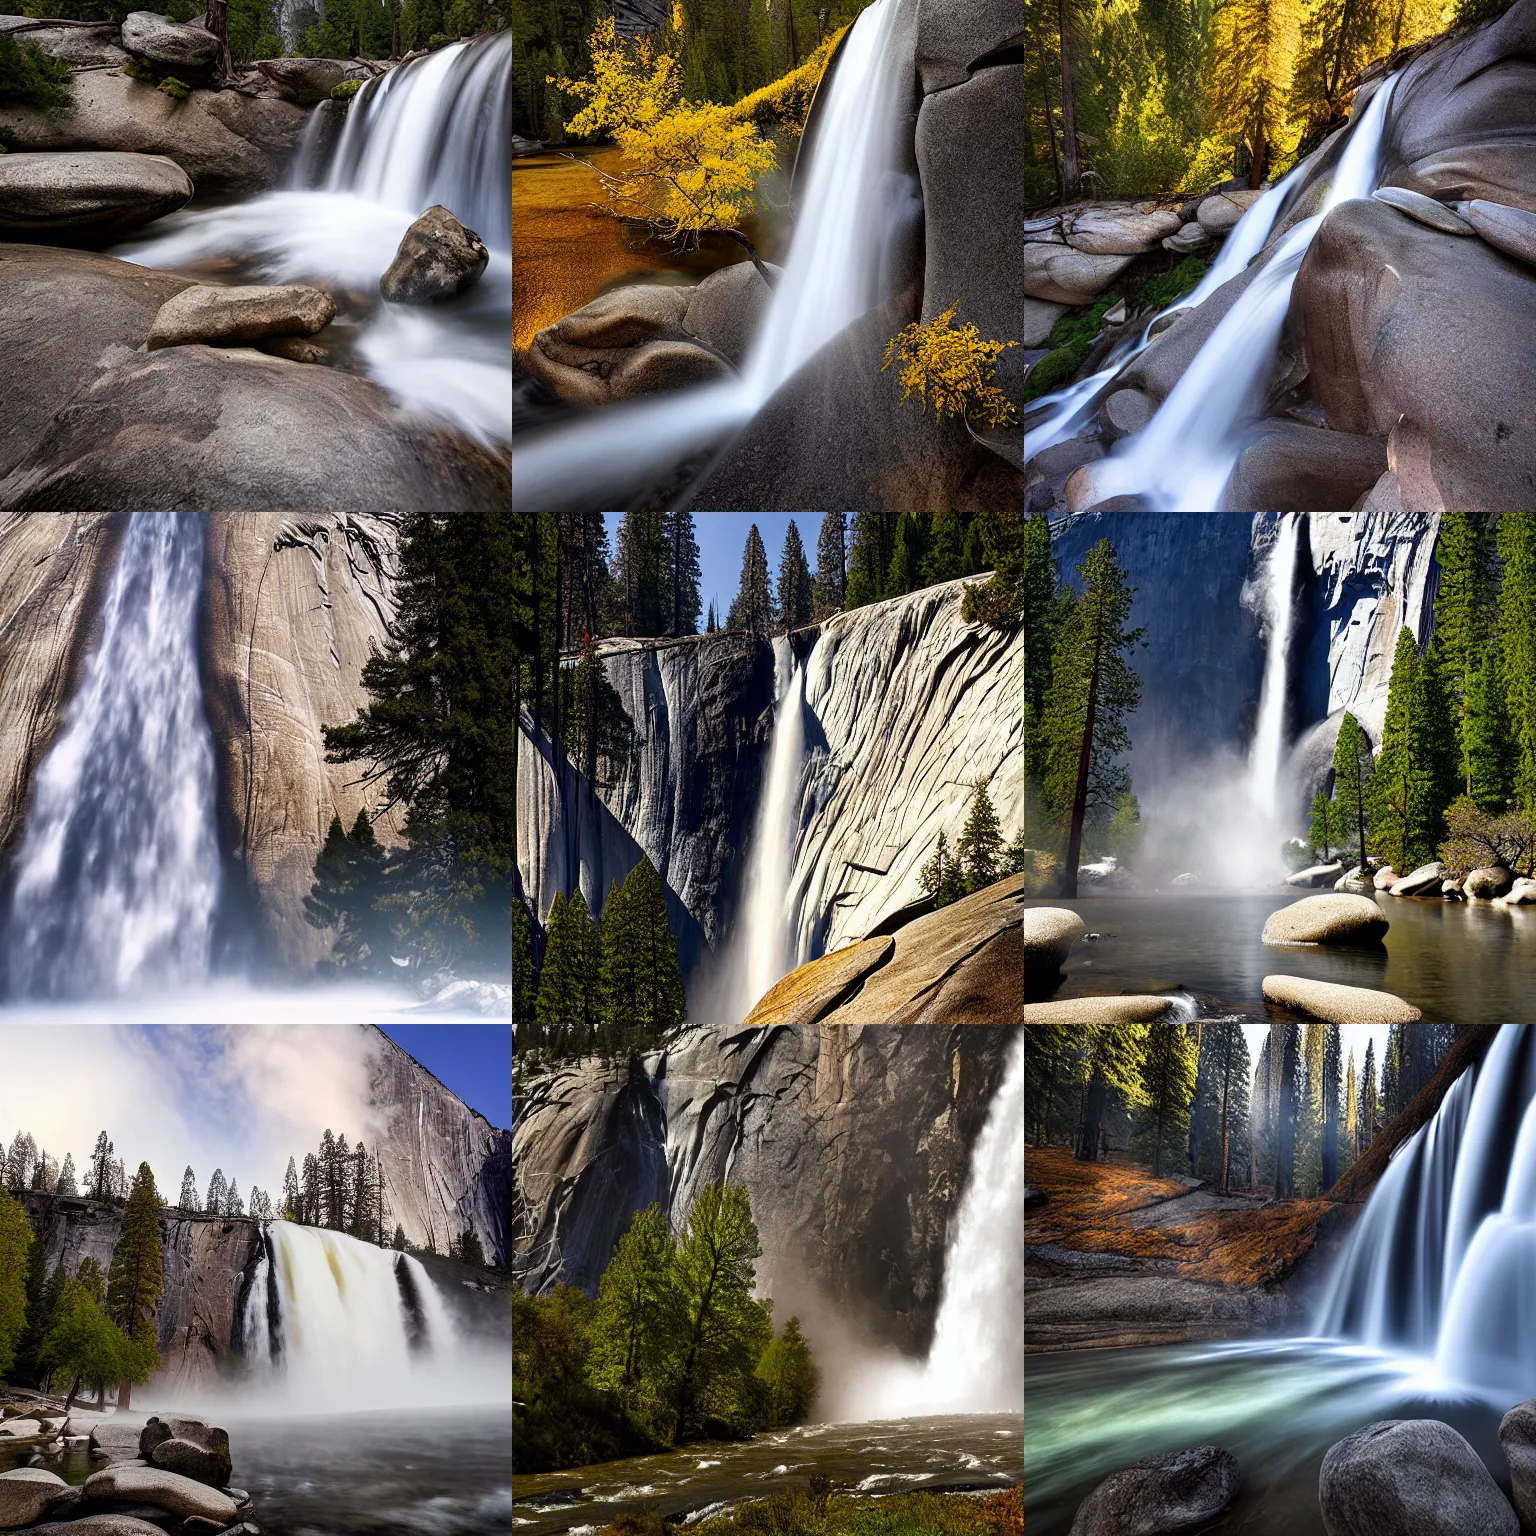 Prompt: an award - winning professional photograph of a waterfall in yosemite national park, zeiss, nikon